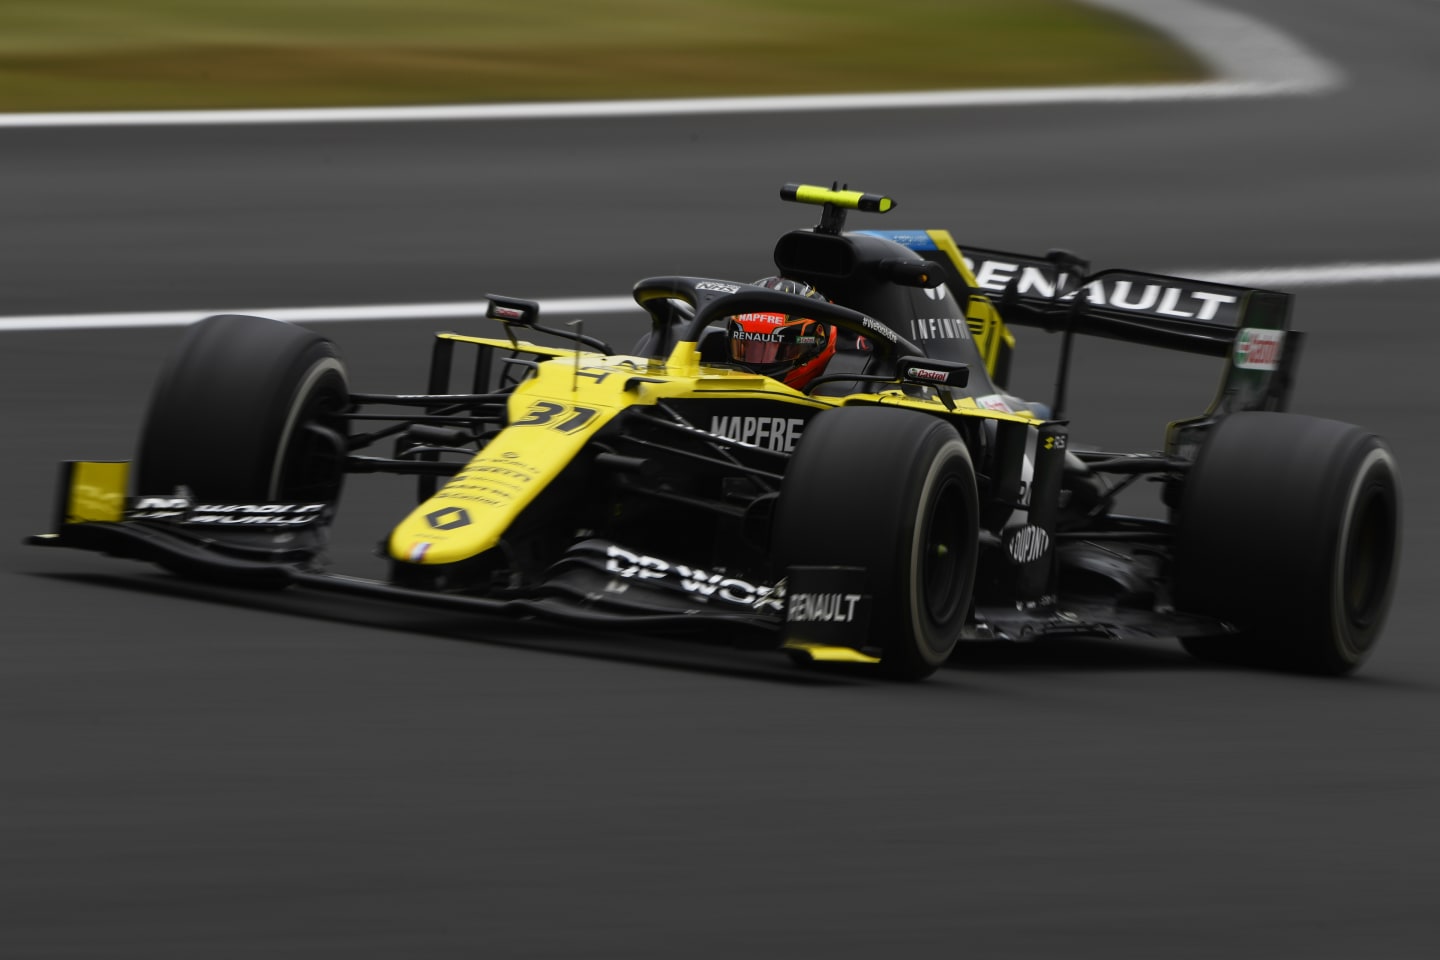 NORTHAMPTON, ENGLAND - AUGUST 07: Esteban Ocon of France driving the (31) Renault Sport Formula One Team RS20 on track during practice for the F1 70th Anniversary Grand Prix at Silverstone on August 07, 2020 in Northampton, England. (Photo by Rudy Carezzevoli/Getty Images)